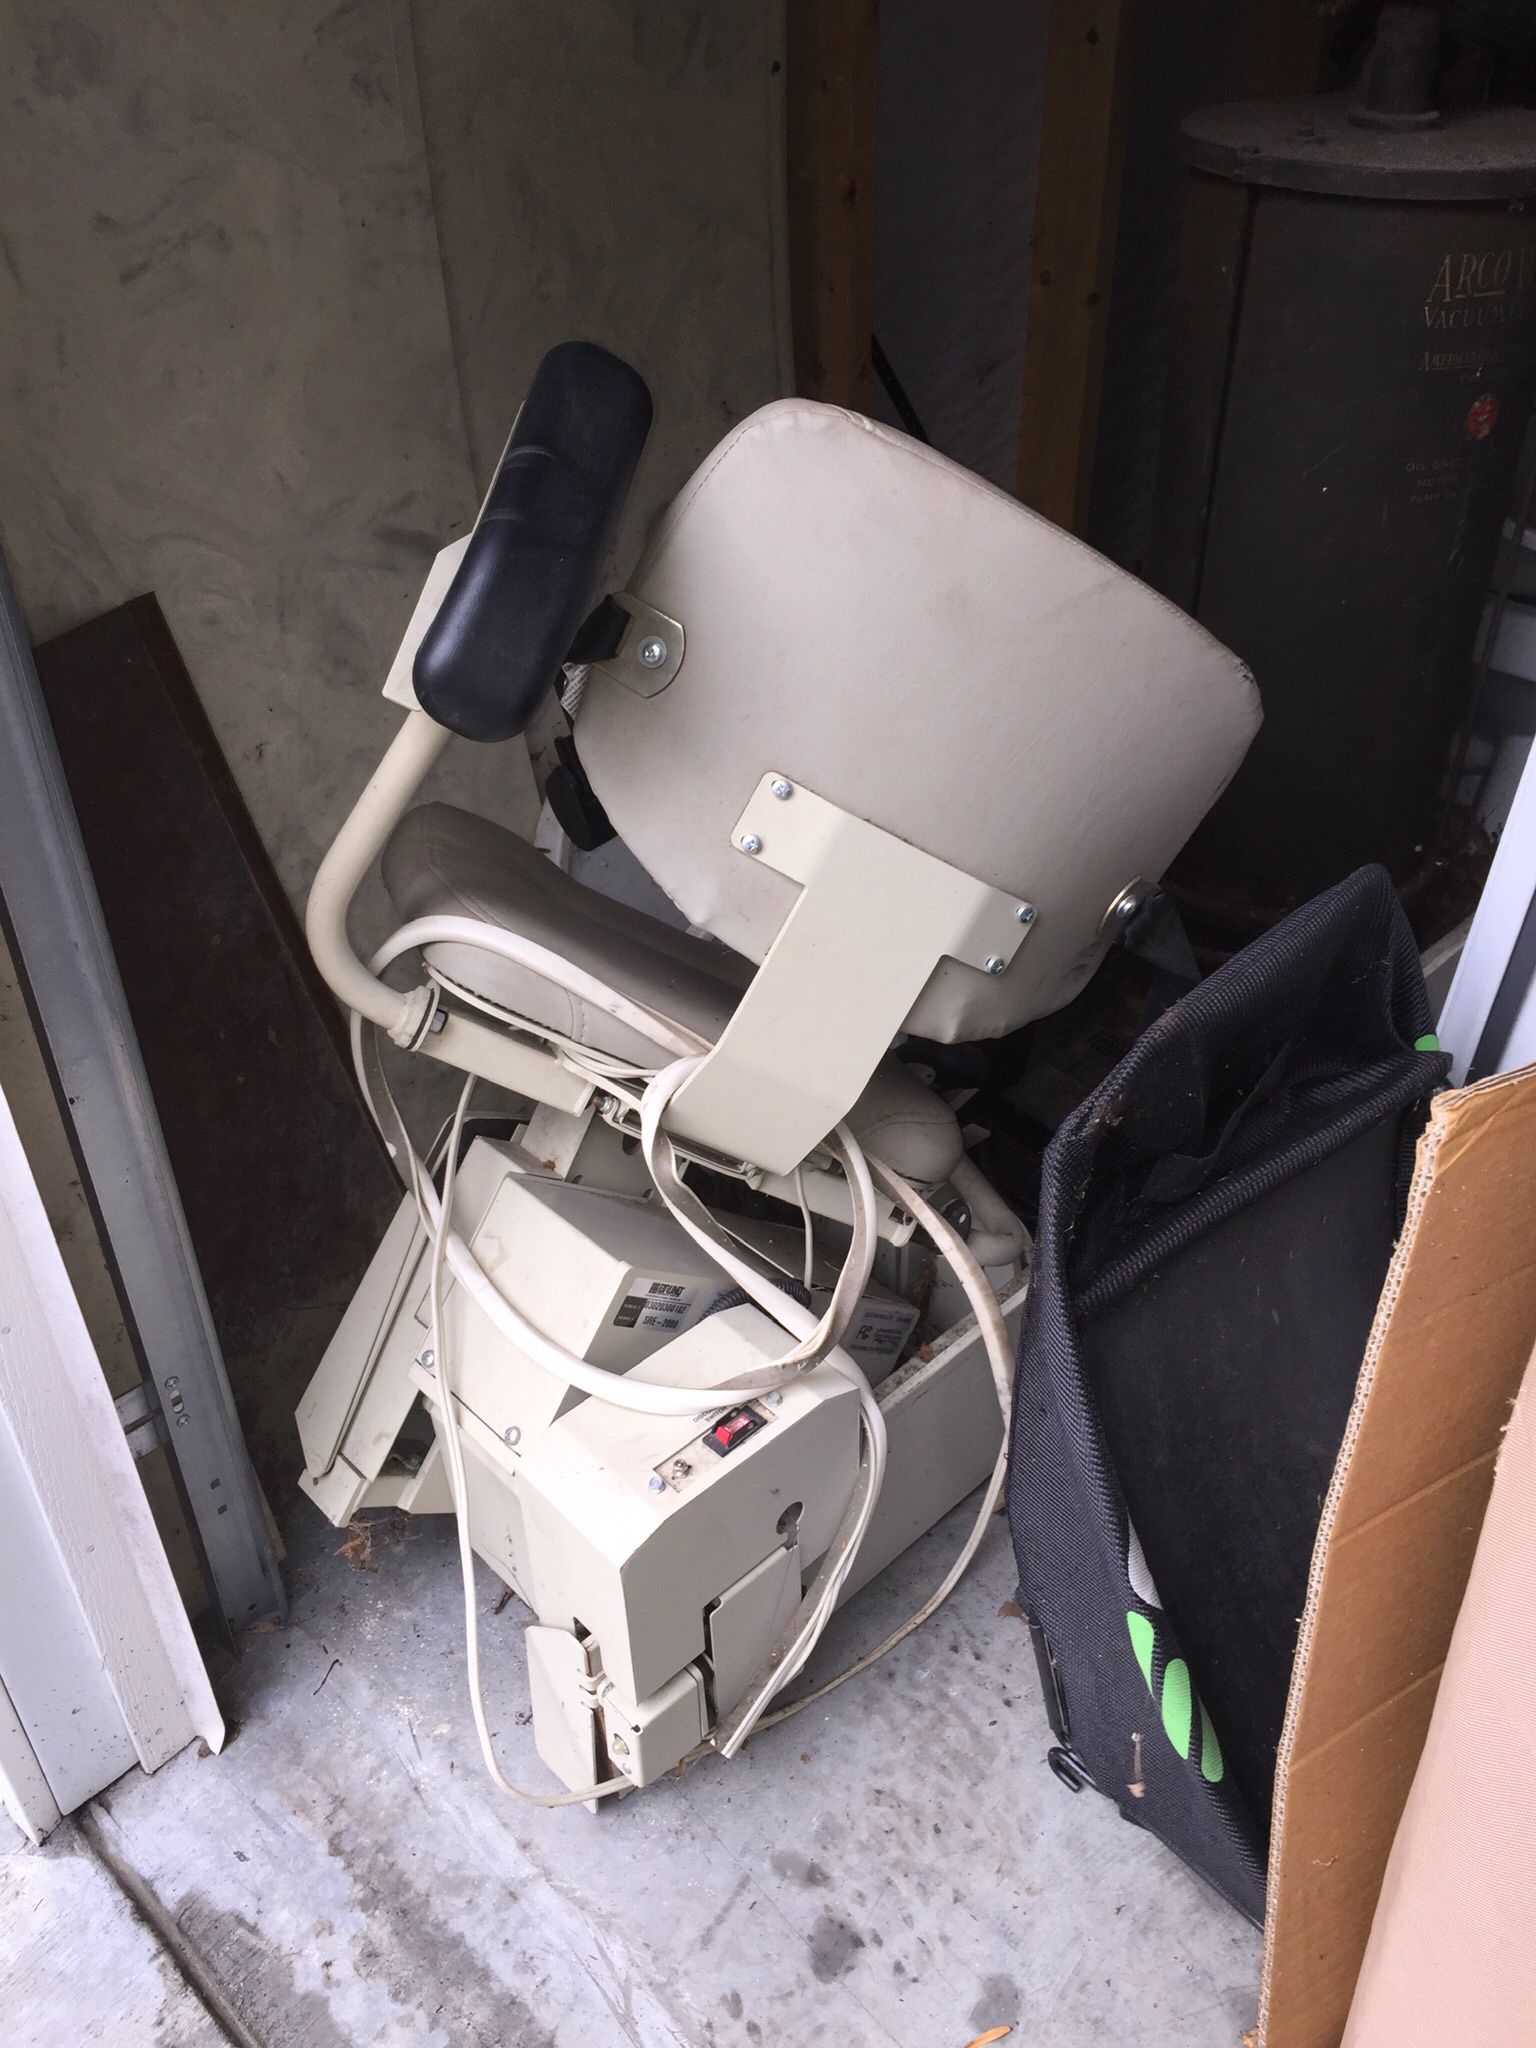   🔥 BRUNO  SRE-2000 Stair Chair Lift 10’+  Length 